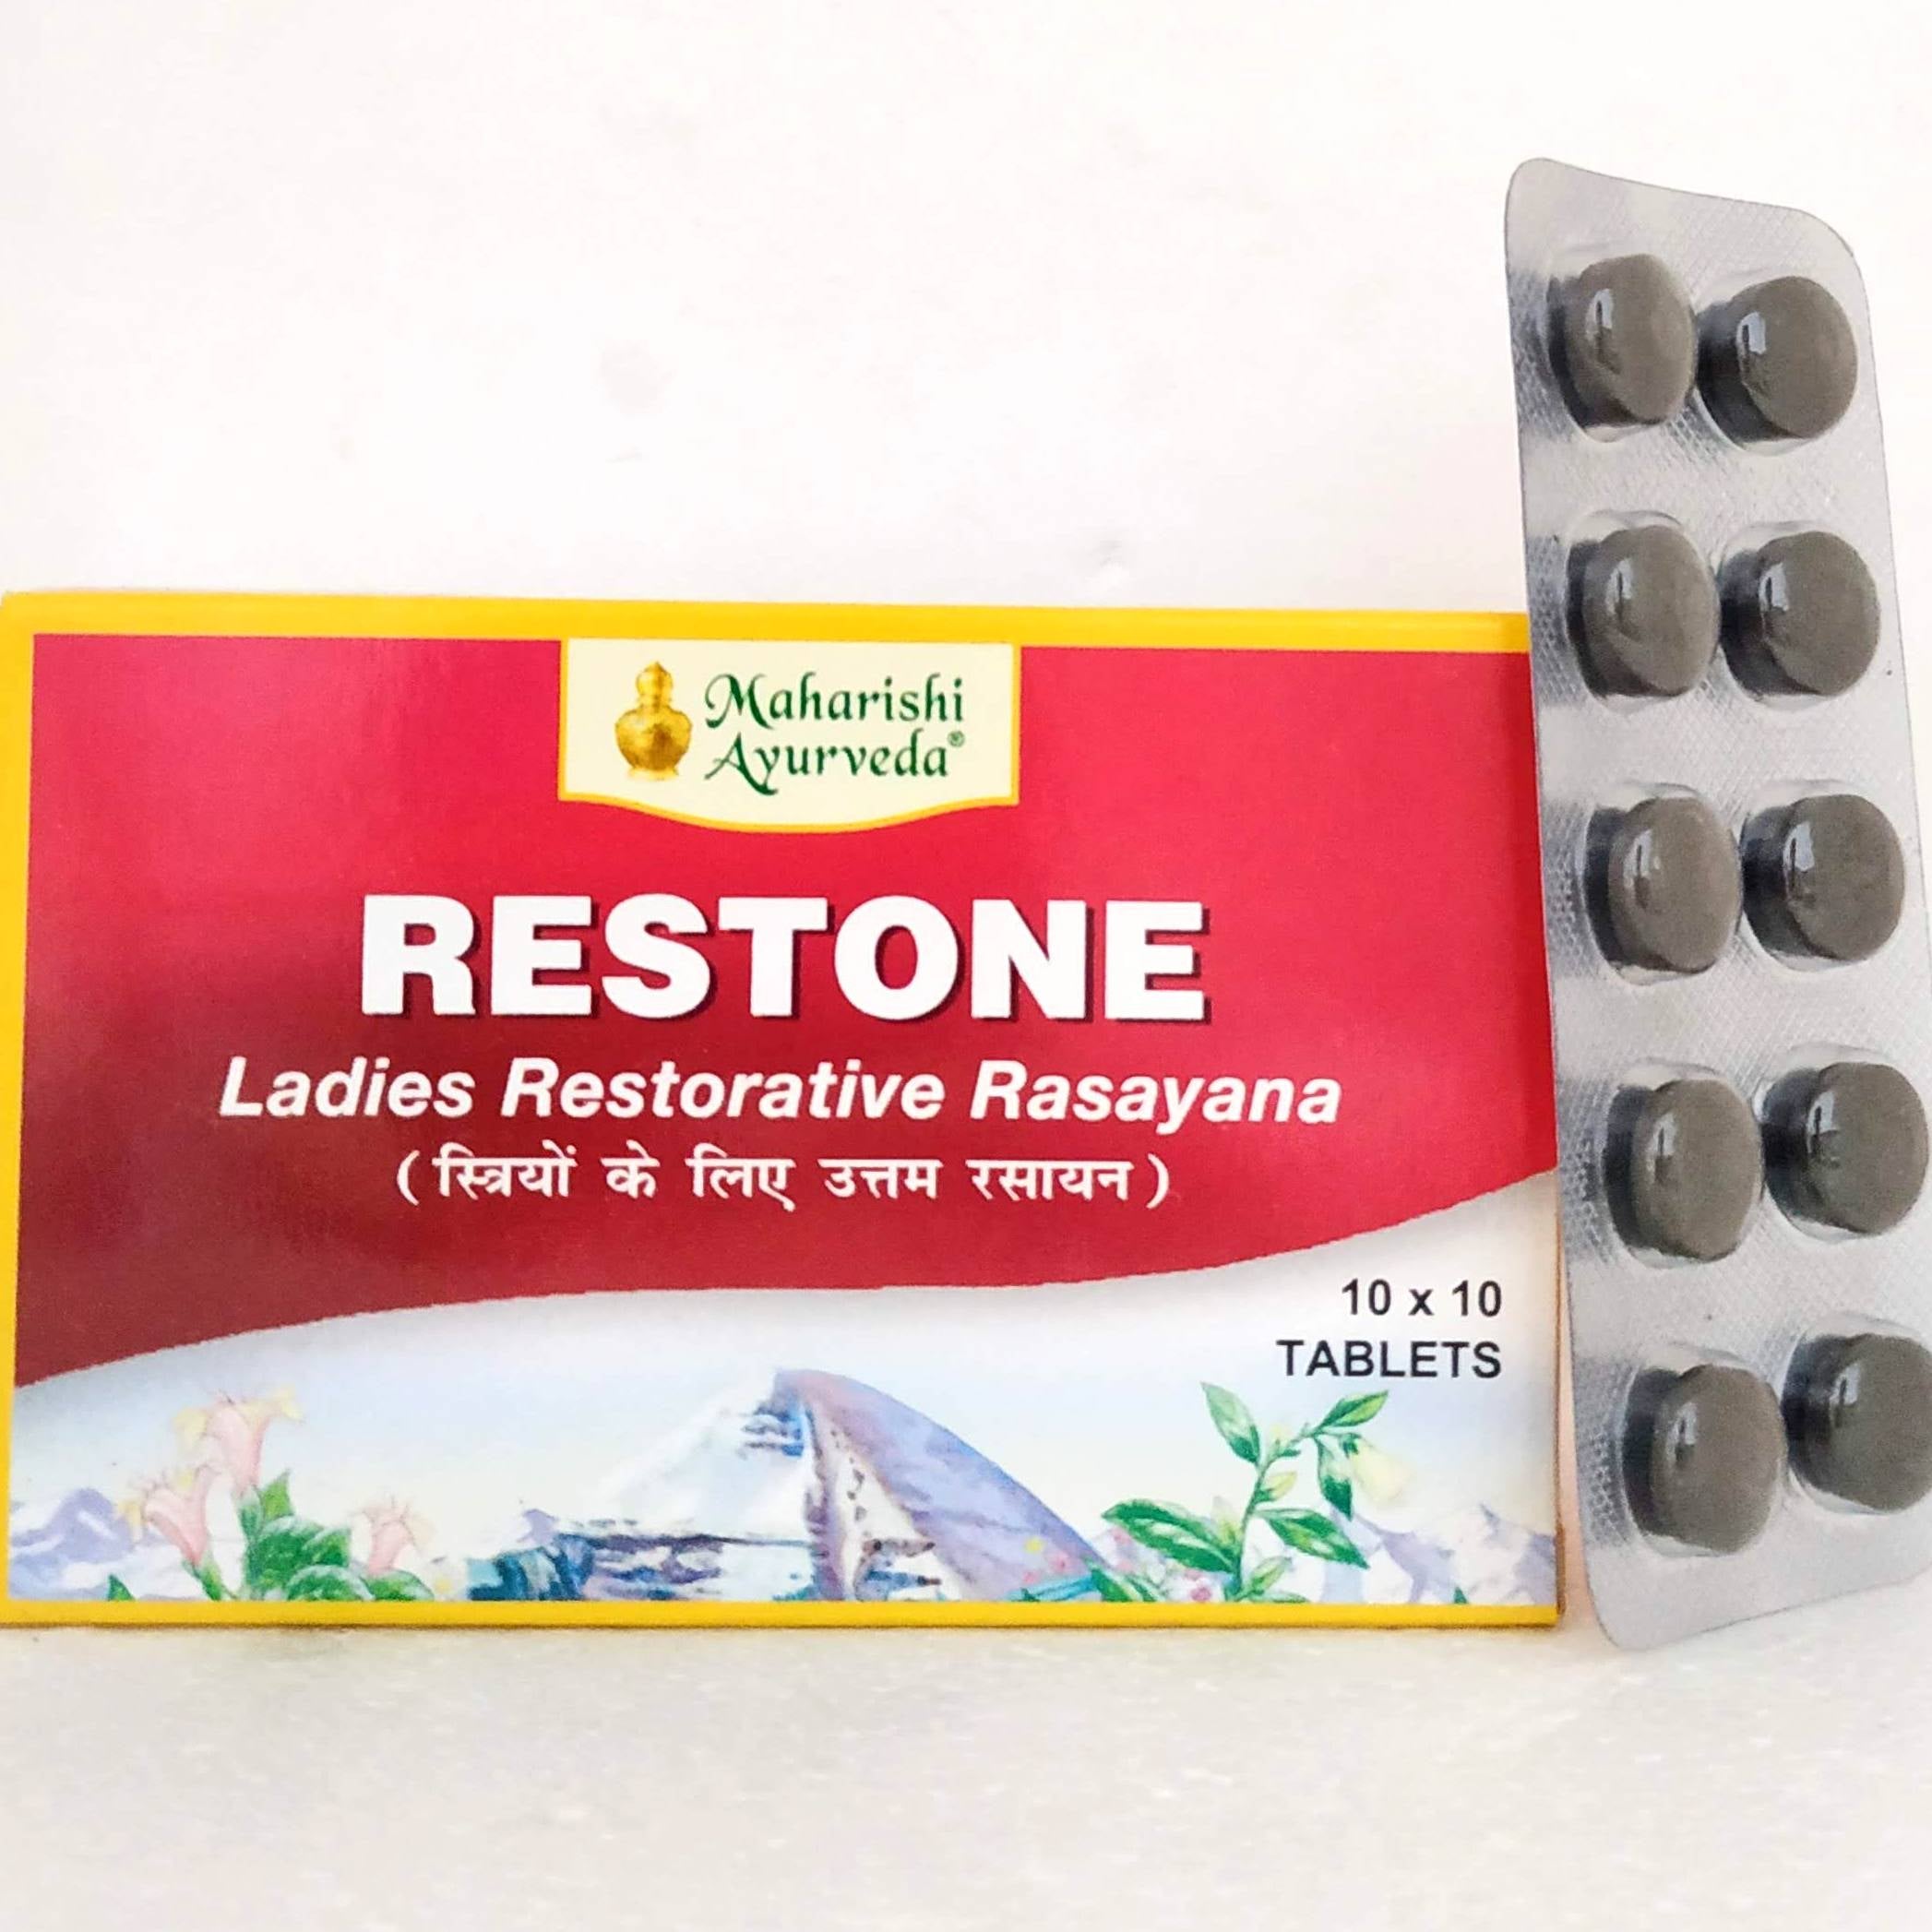 Shop Restone Tablets - 10Tablets at price 60.00 from Maharishi Ayurveda Online - Ayush Care